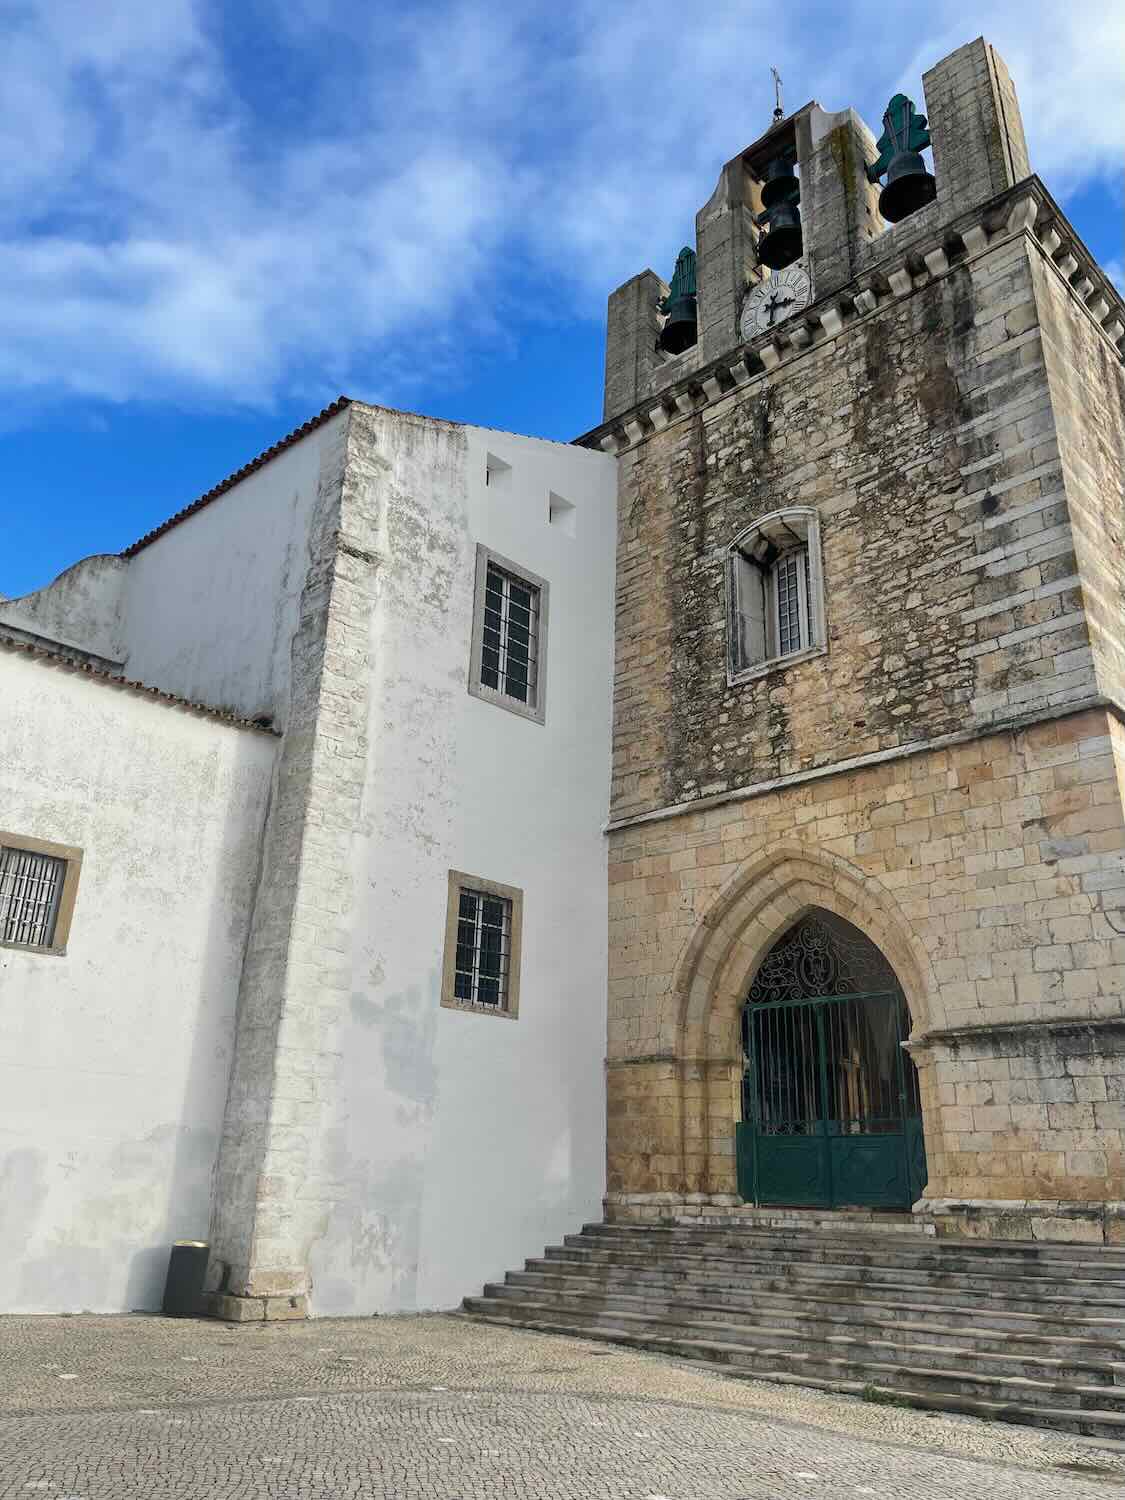 The imposing architecture of a church in Faro, featuring a tall bell tower with green rooftop accents, a Gothic arched entrance, and a contrast of white walls against the blue sky.